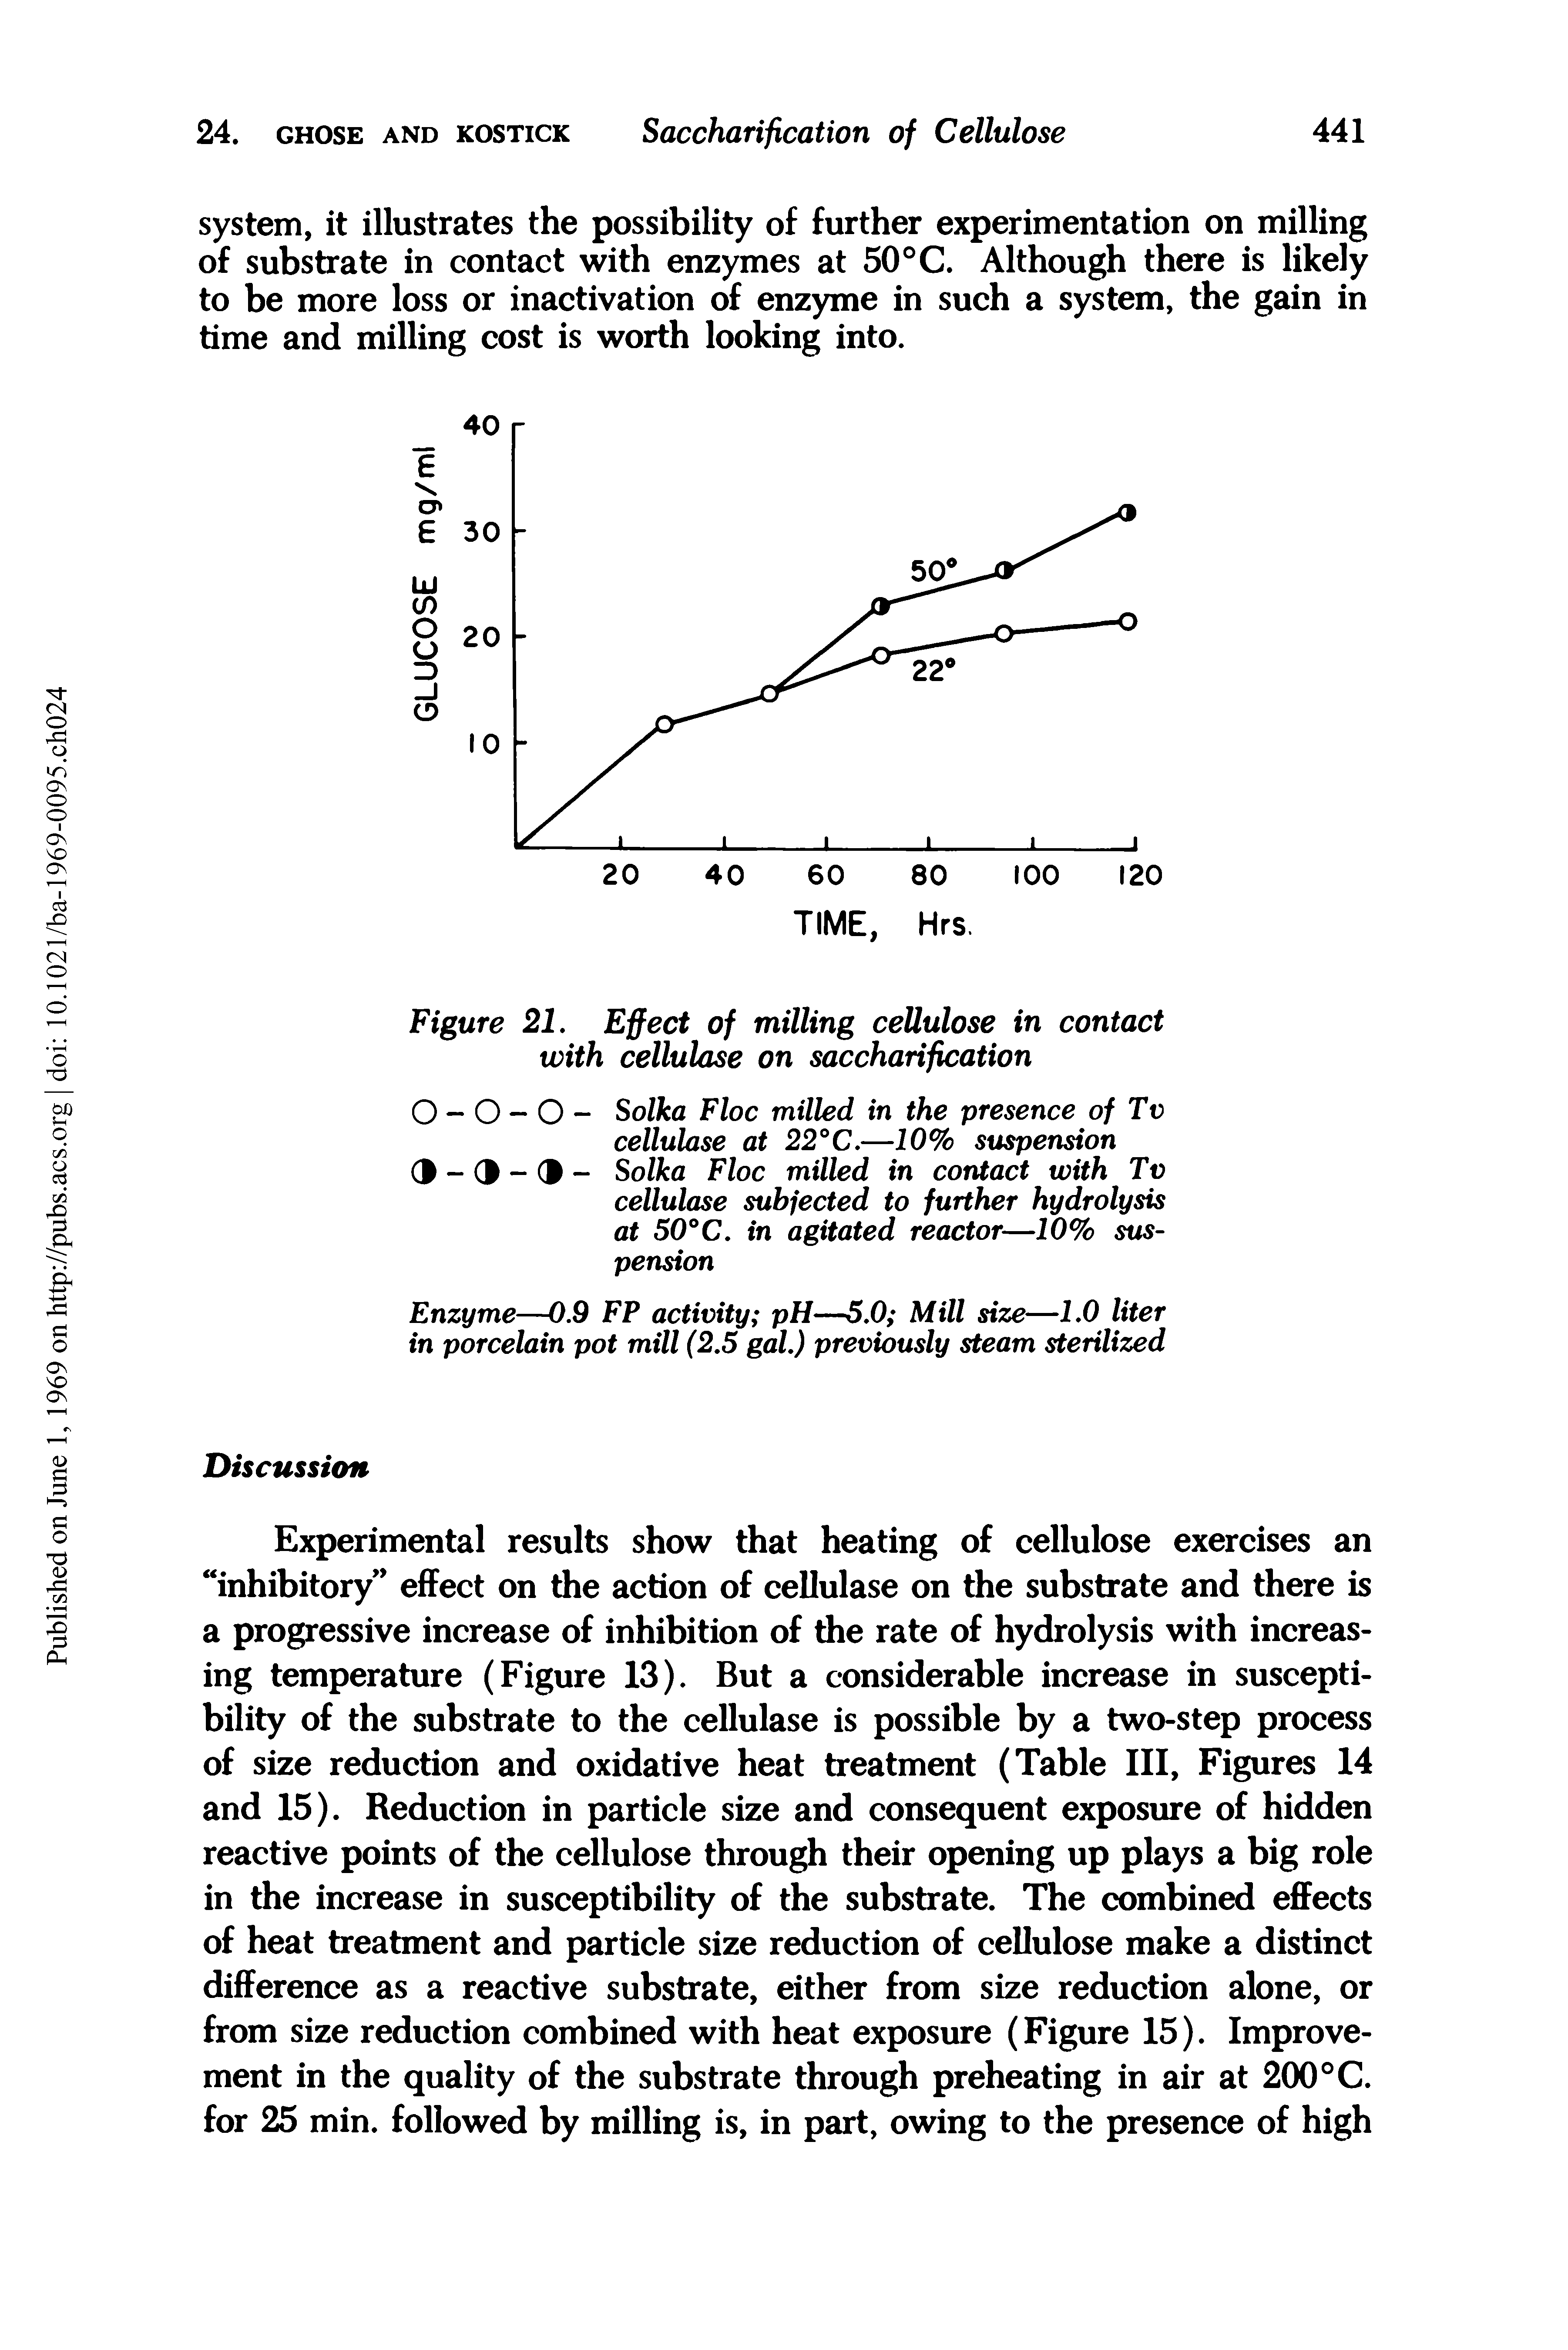 Figure 21. Effect of milling cellulose in contact with cellulose on saccharification...